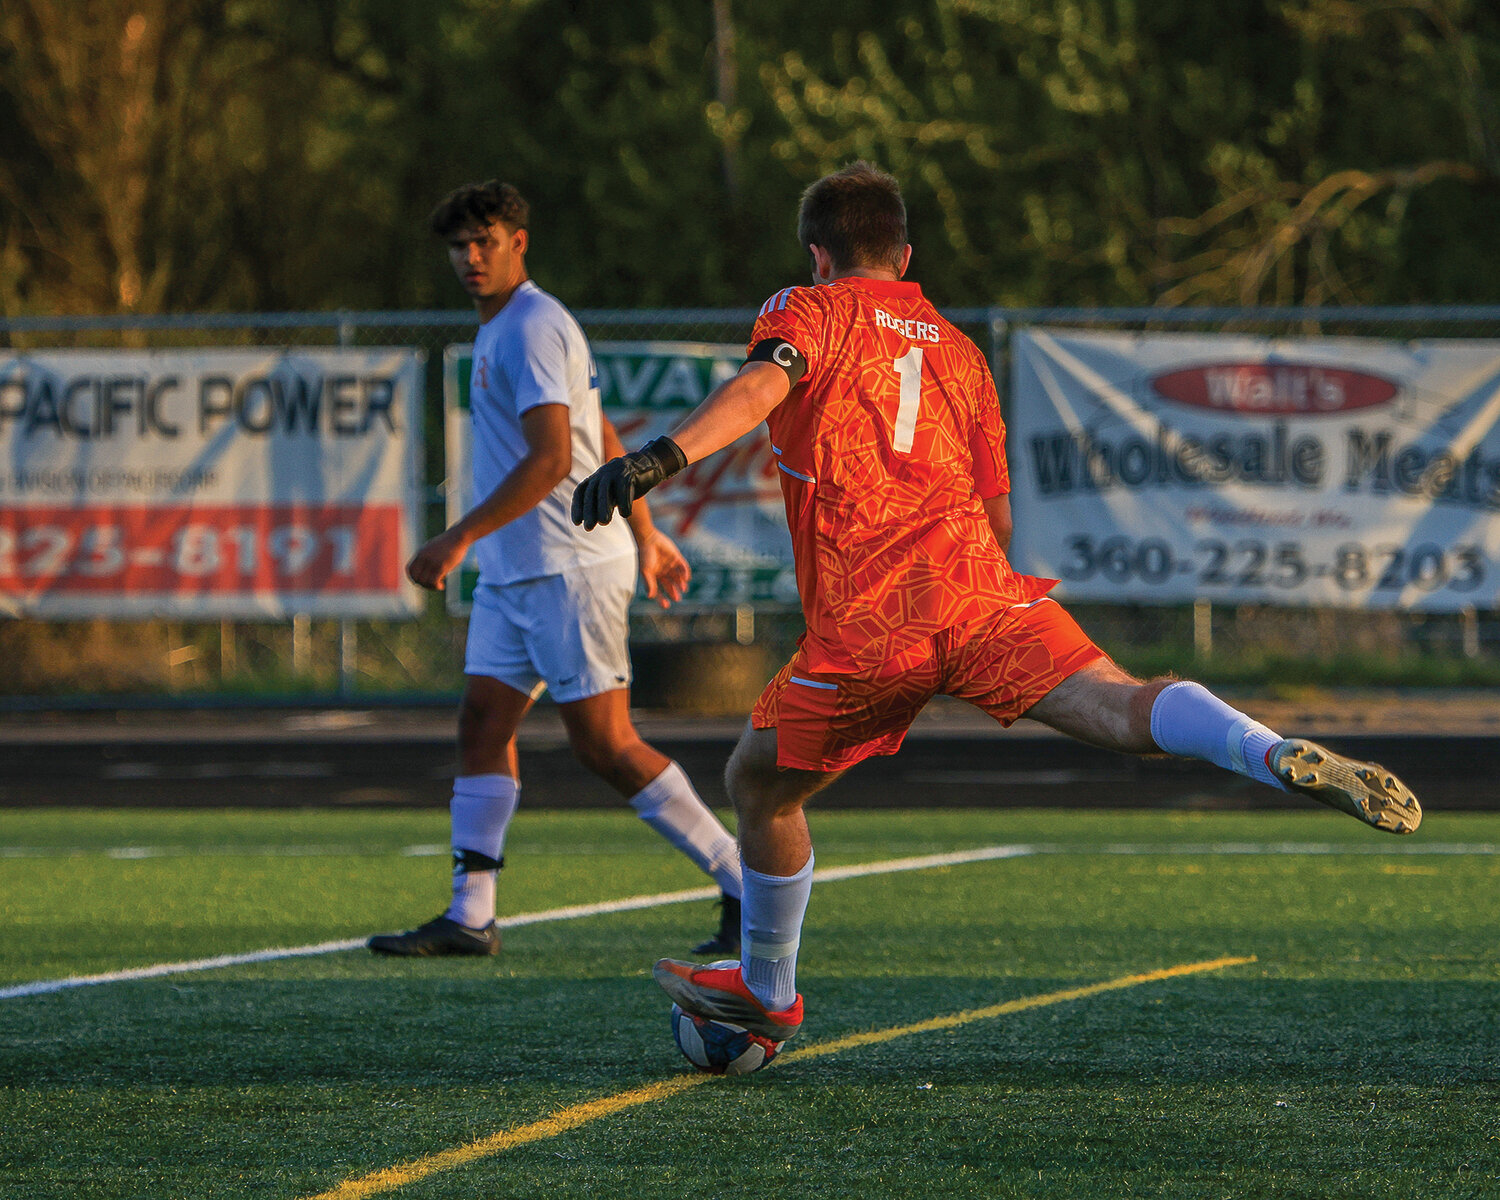 Ridgefield's first half keeper, Brandon Rogers, strikes the ball down the pitch during the team's 1-0 victory over Woodland on Thursday, April 27.